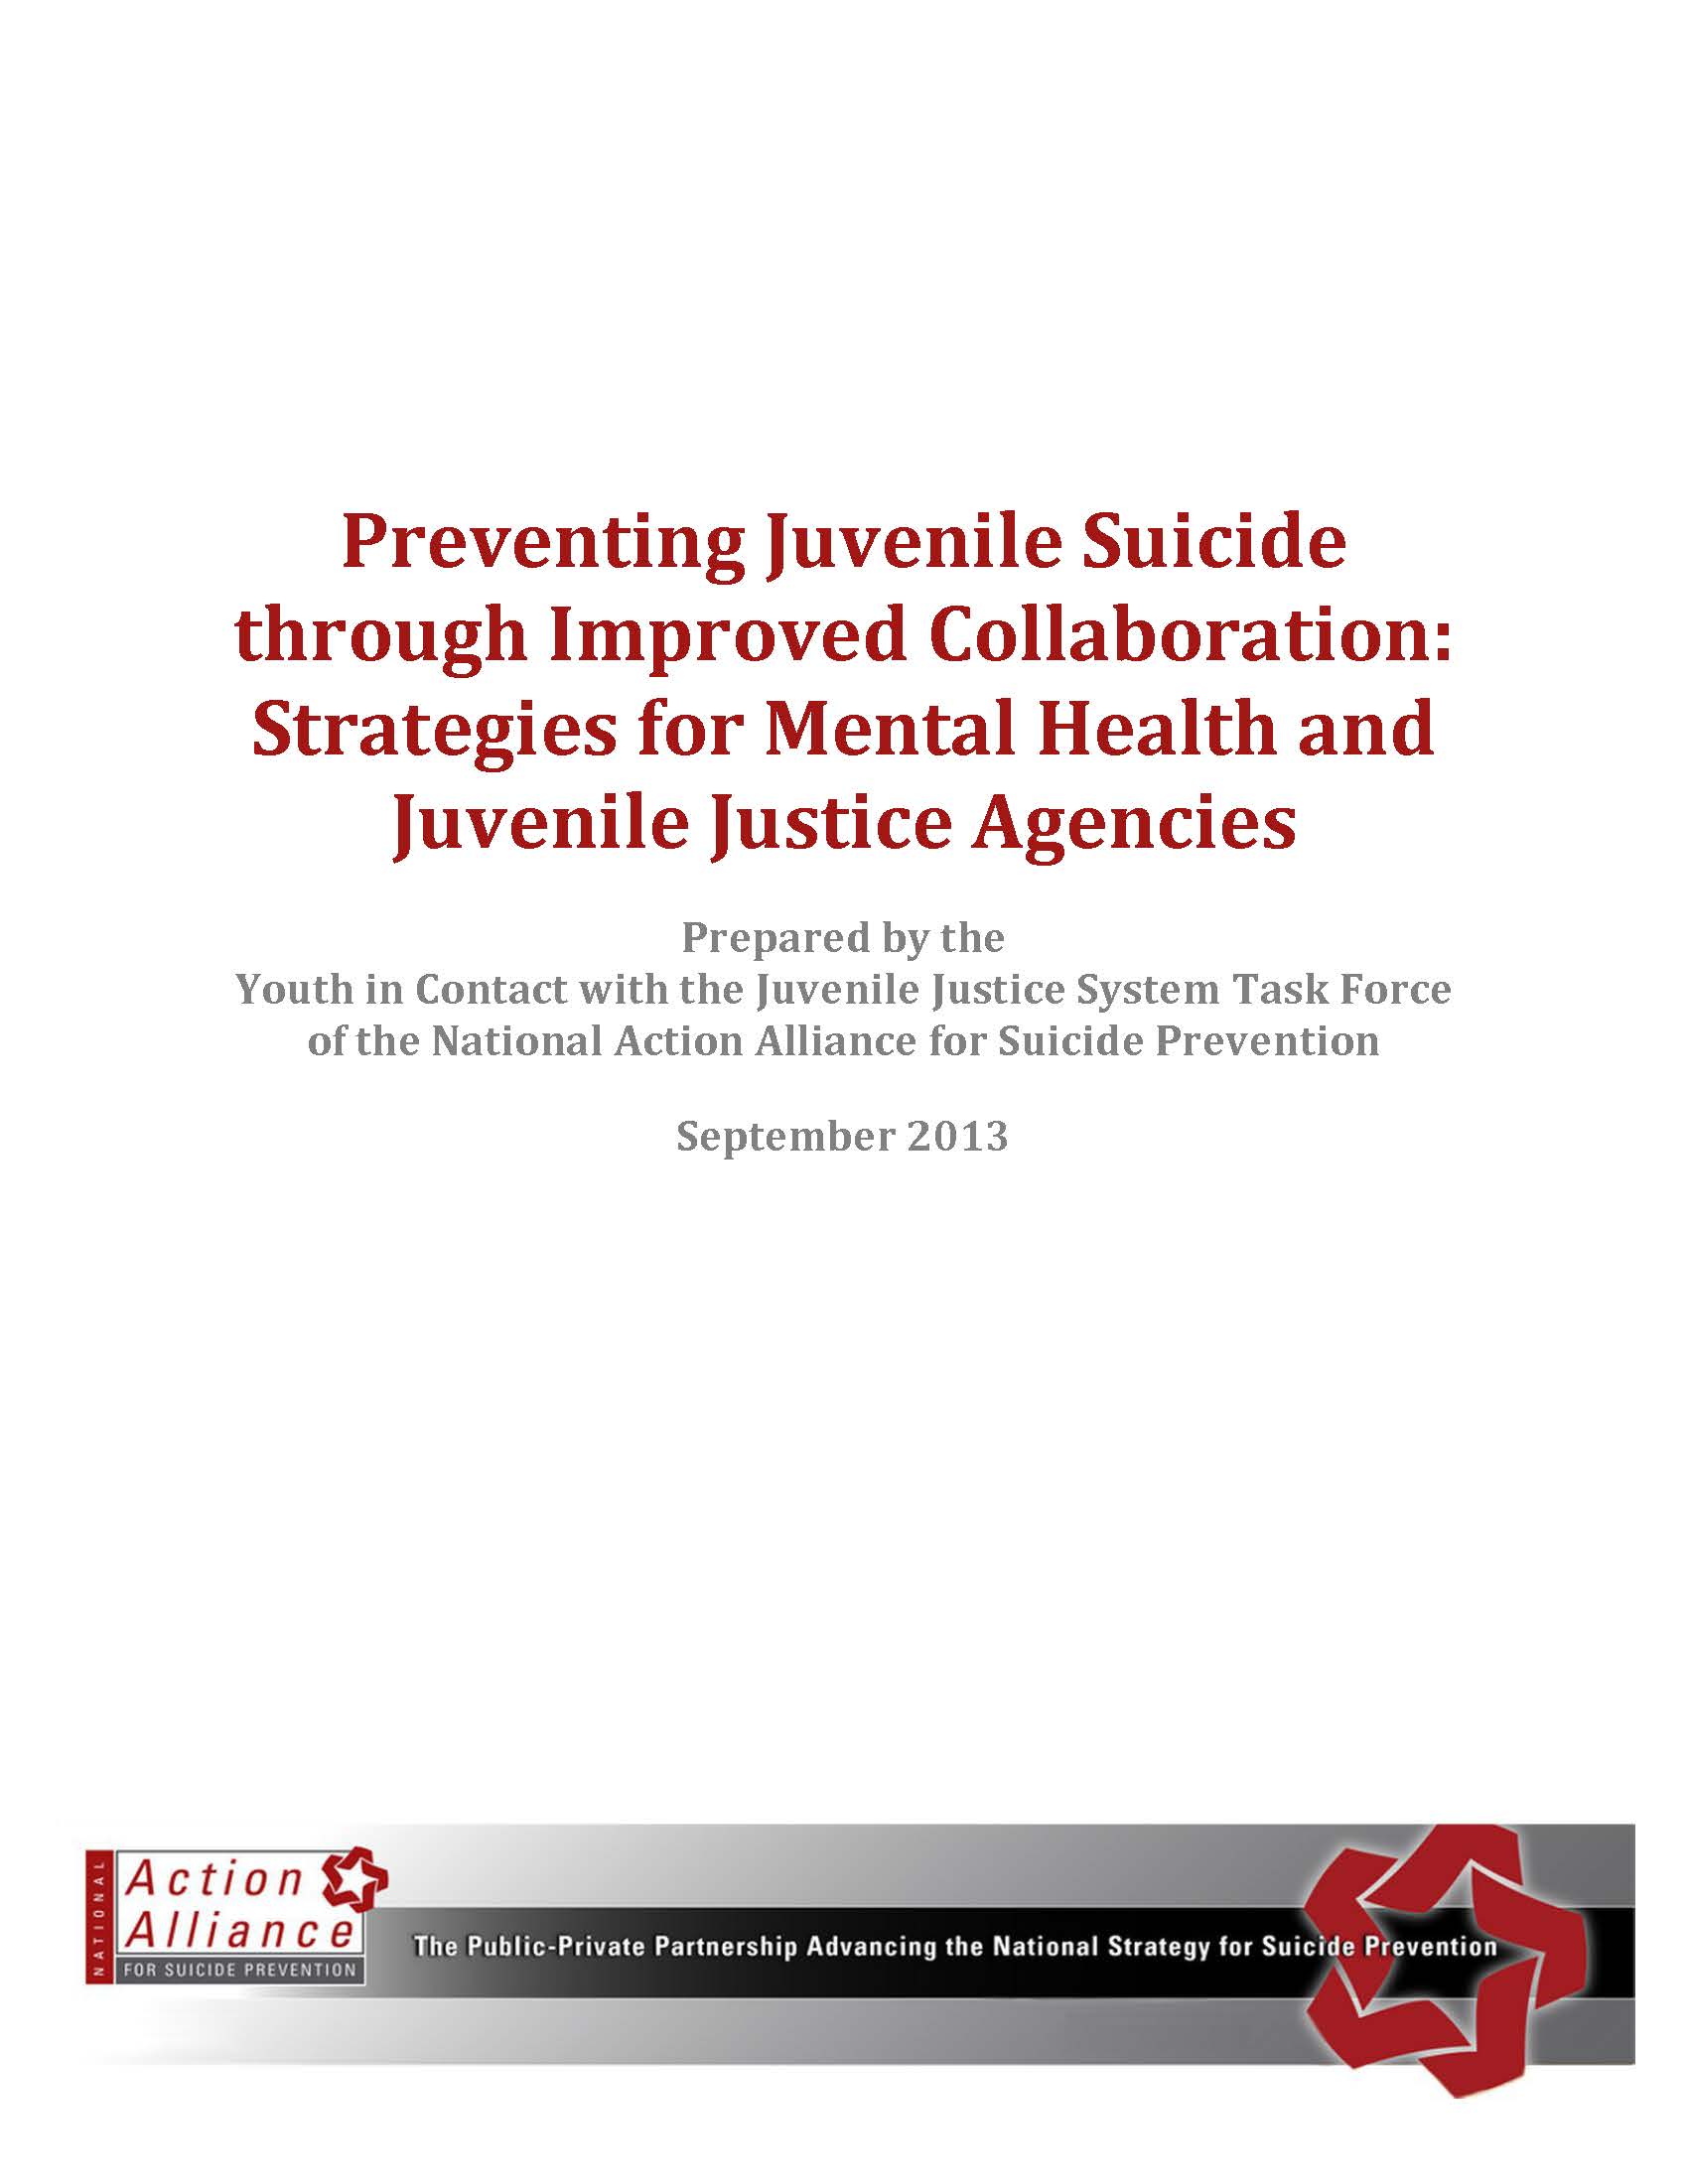 Guide to Developing and Revising Suicide Prevention Protocols for Youth in Contact with the Juvenile Justice System